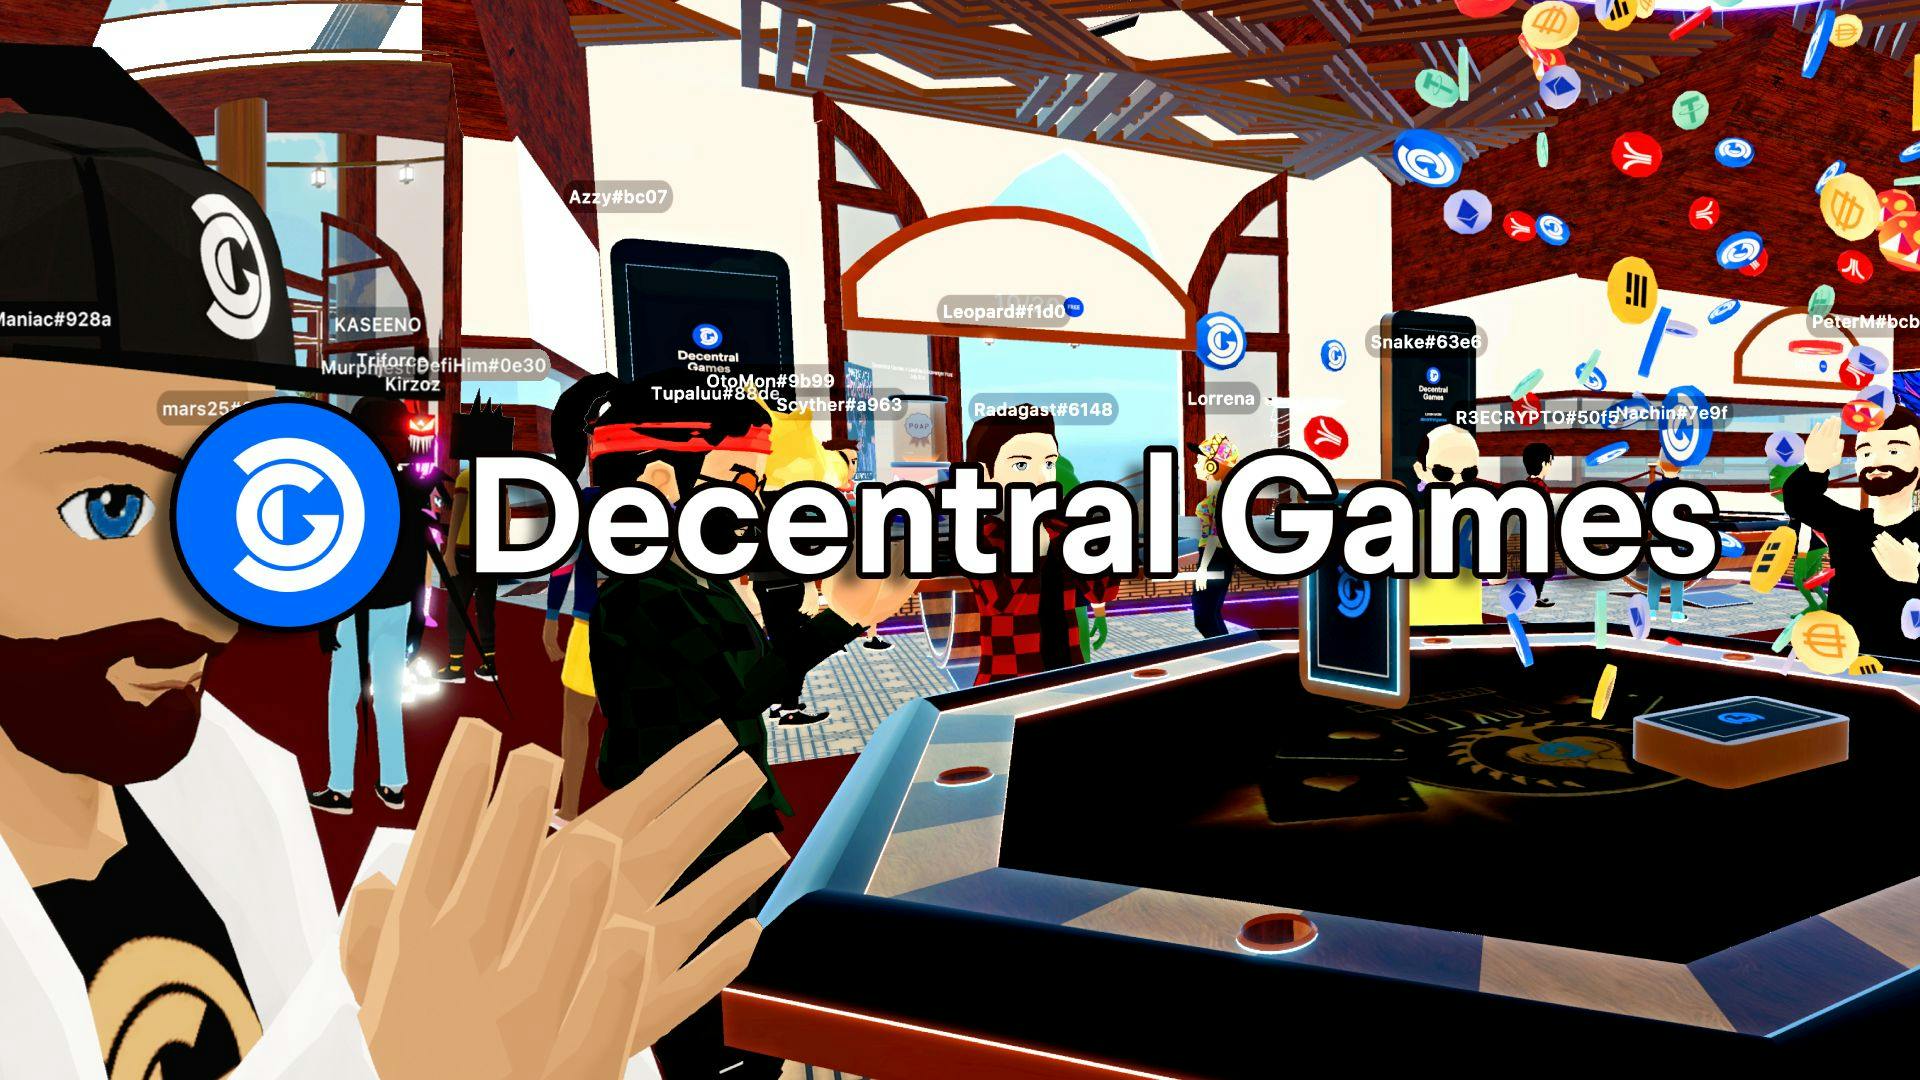 featured image - Decentral Games Emerges As The Front-Runner In The Growing Play-To-Earn Model Revolution